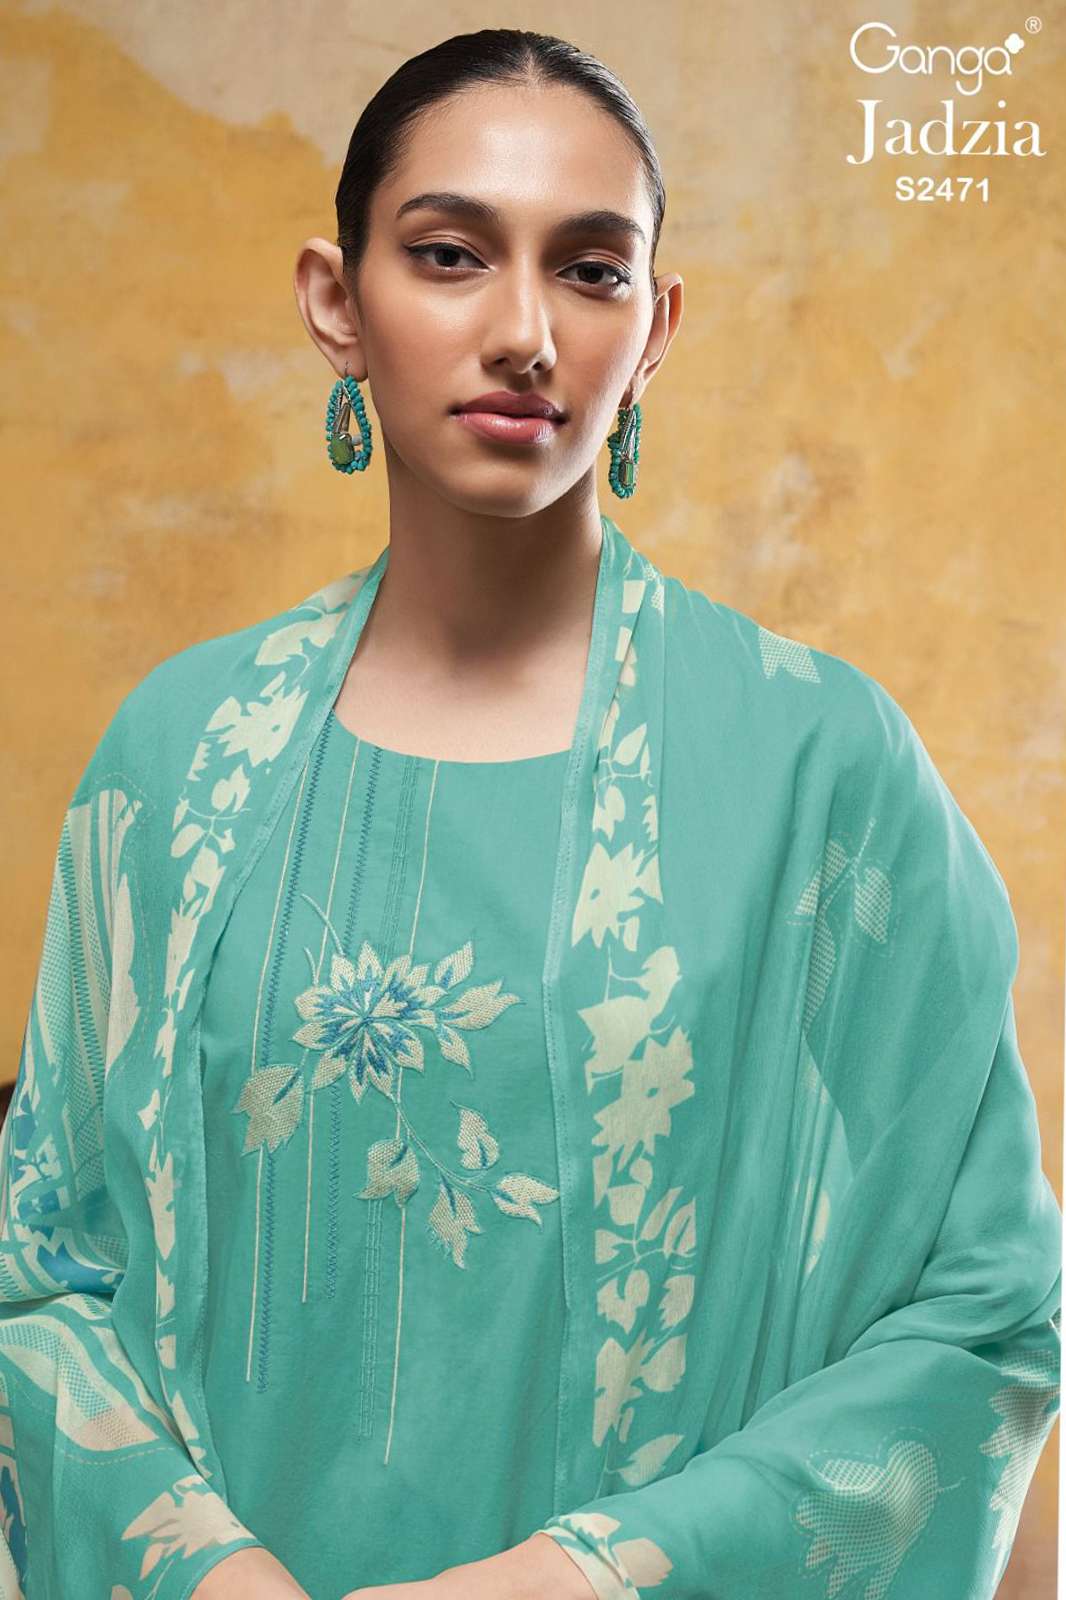  Ganga Jadizia 2471 PREMIUM COTTON SOLID WITH EMBROIDERY AND SOLID BORDER SUIT